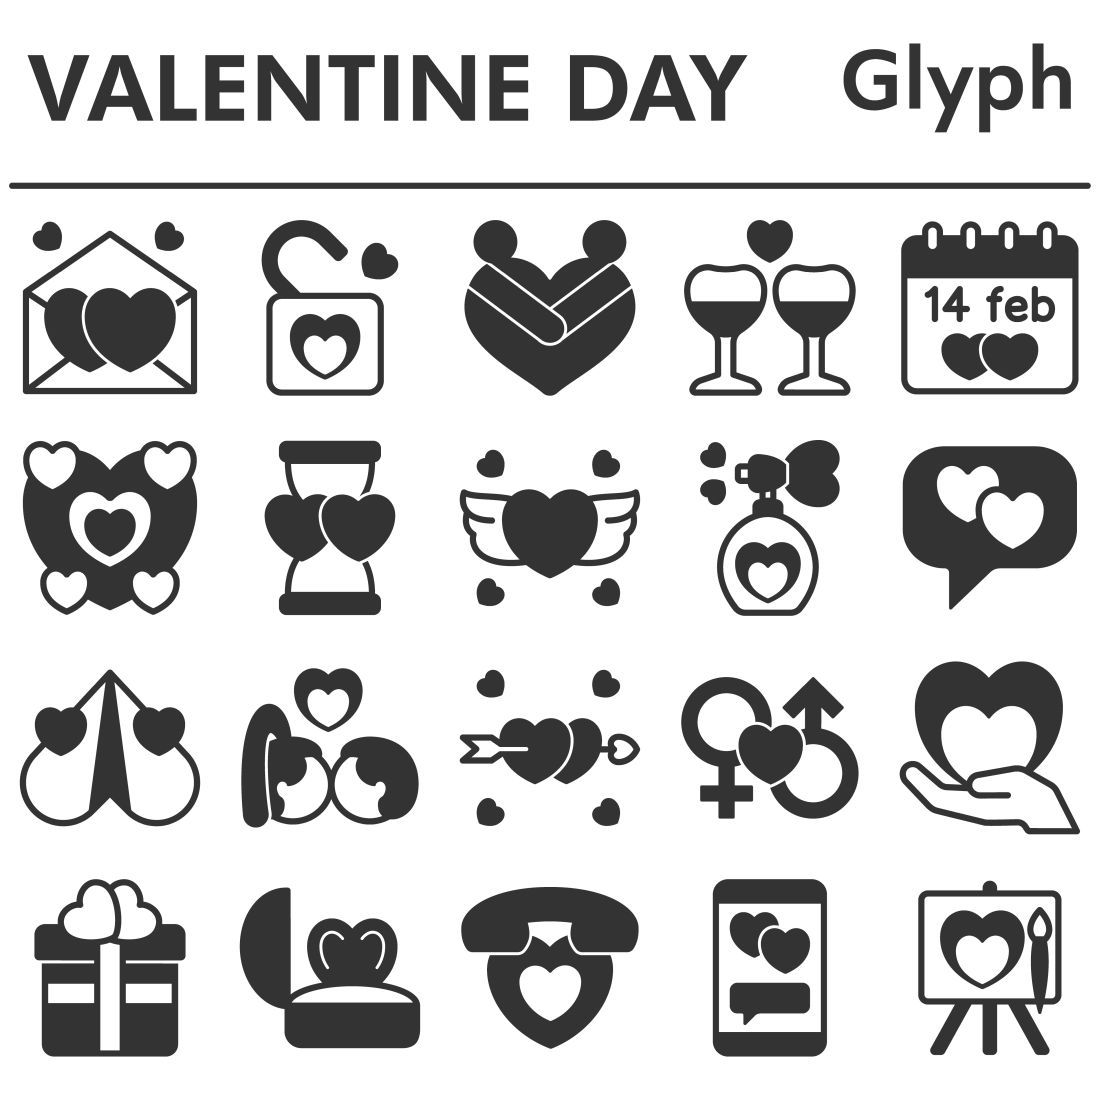 Valentines day icons set, glyph style cover image.